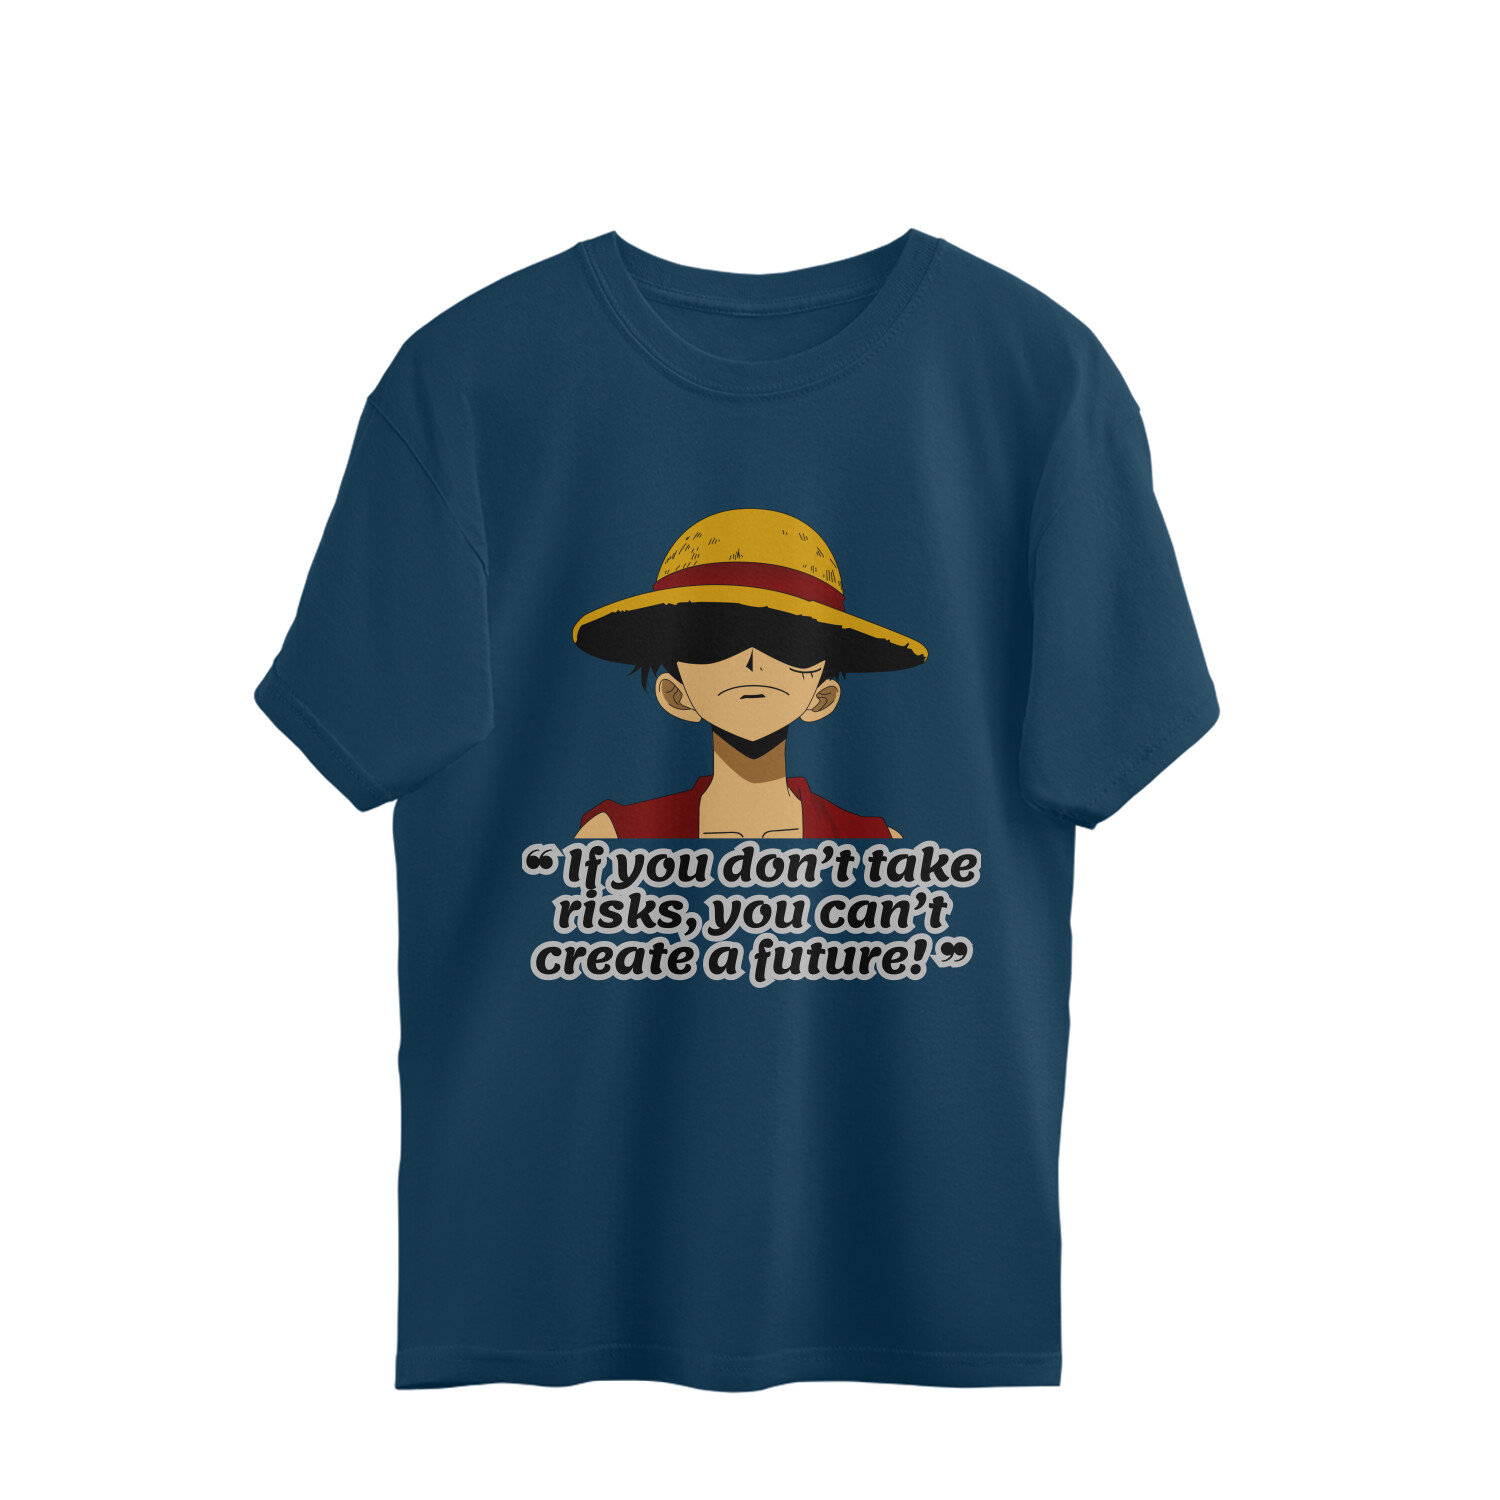 One Piece Quote Oversized T-shirt - Nile Blue, L, Free